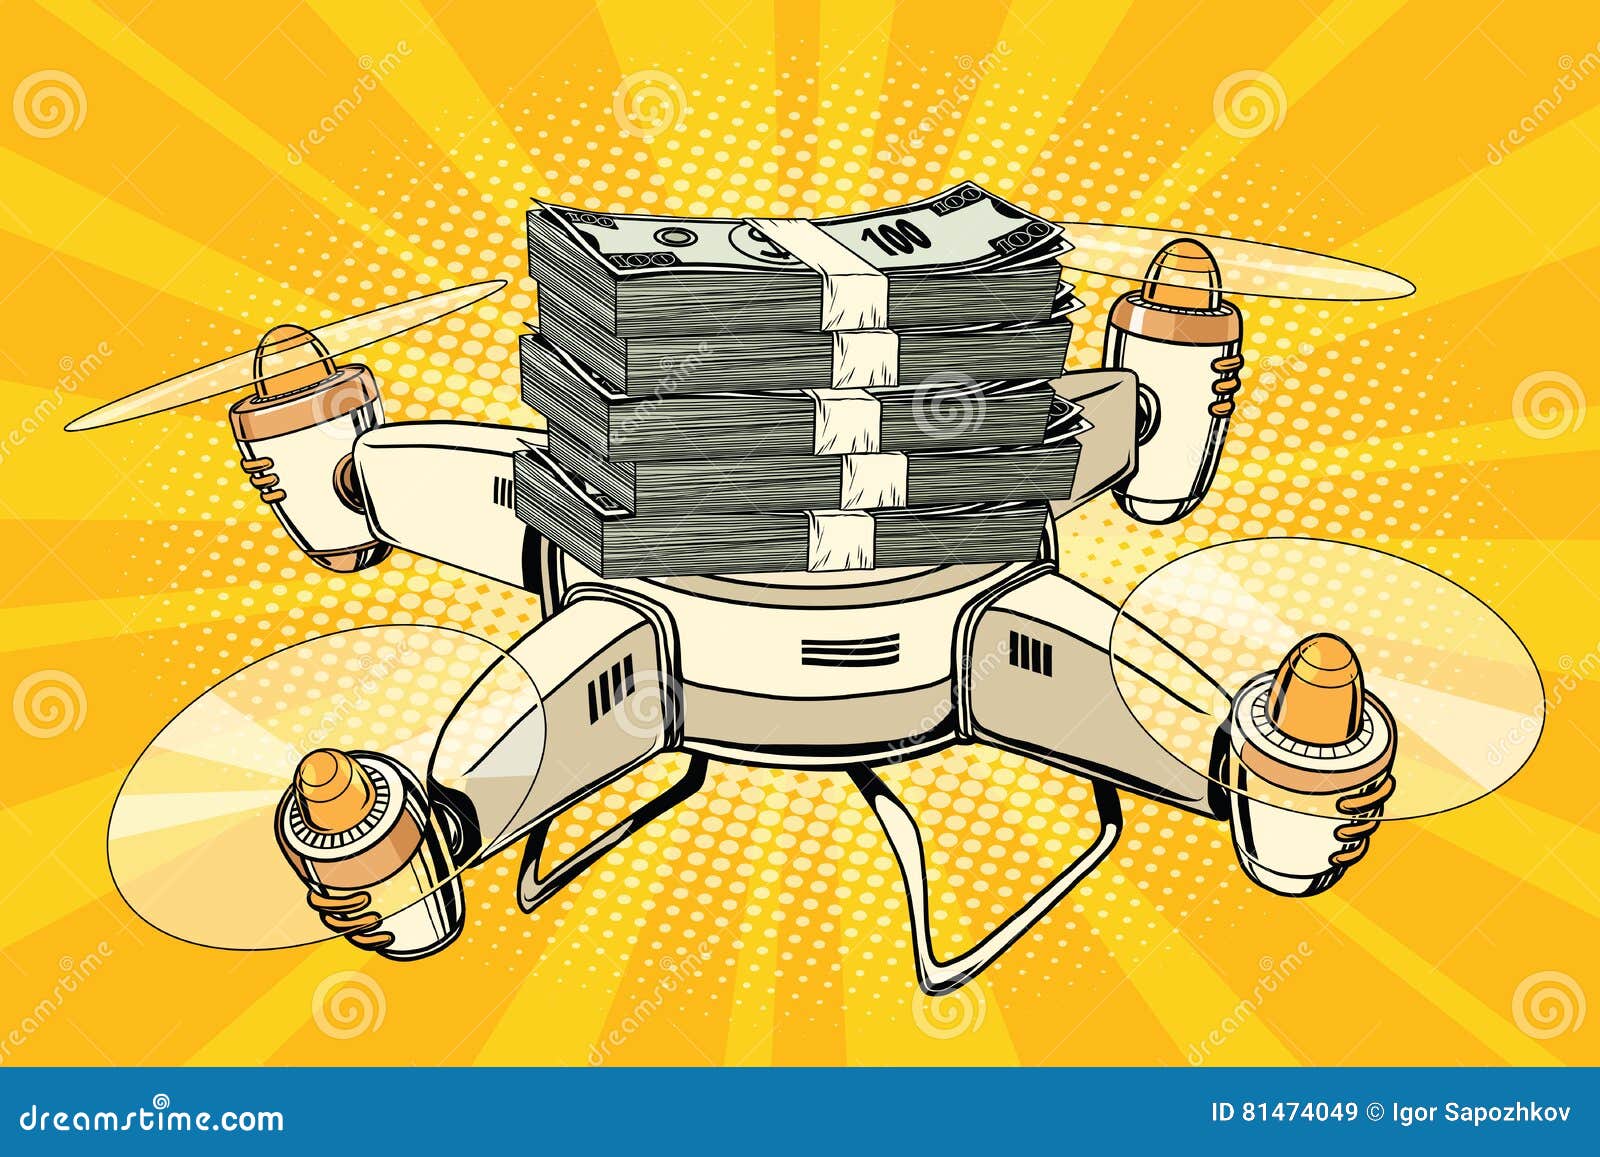 drone copter with bundles of money